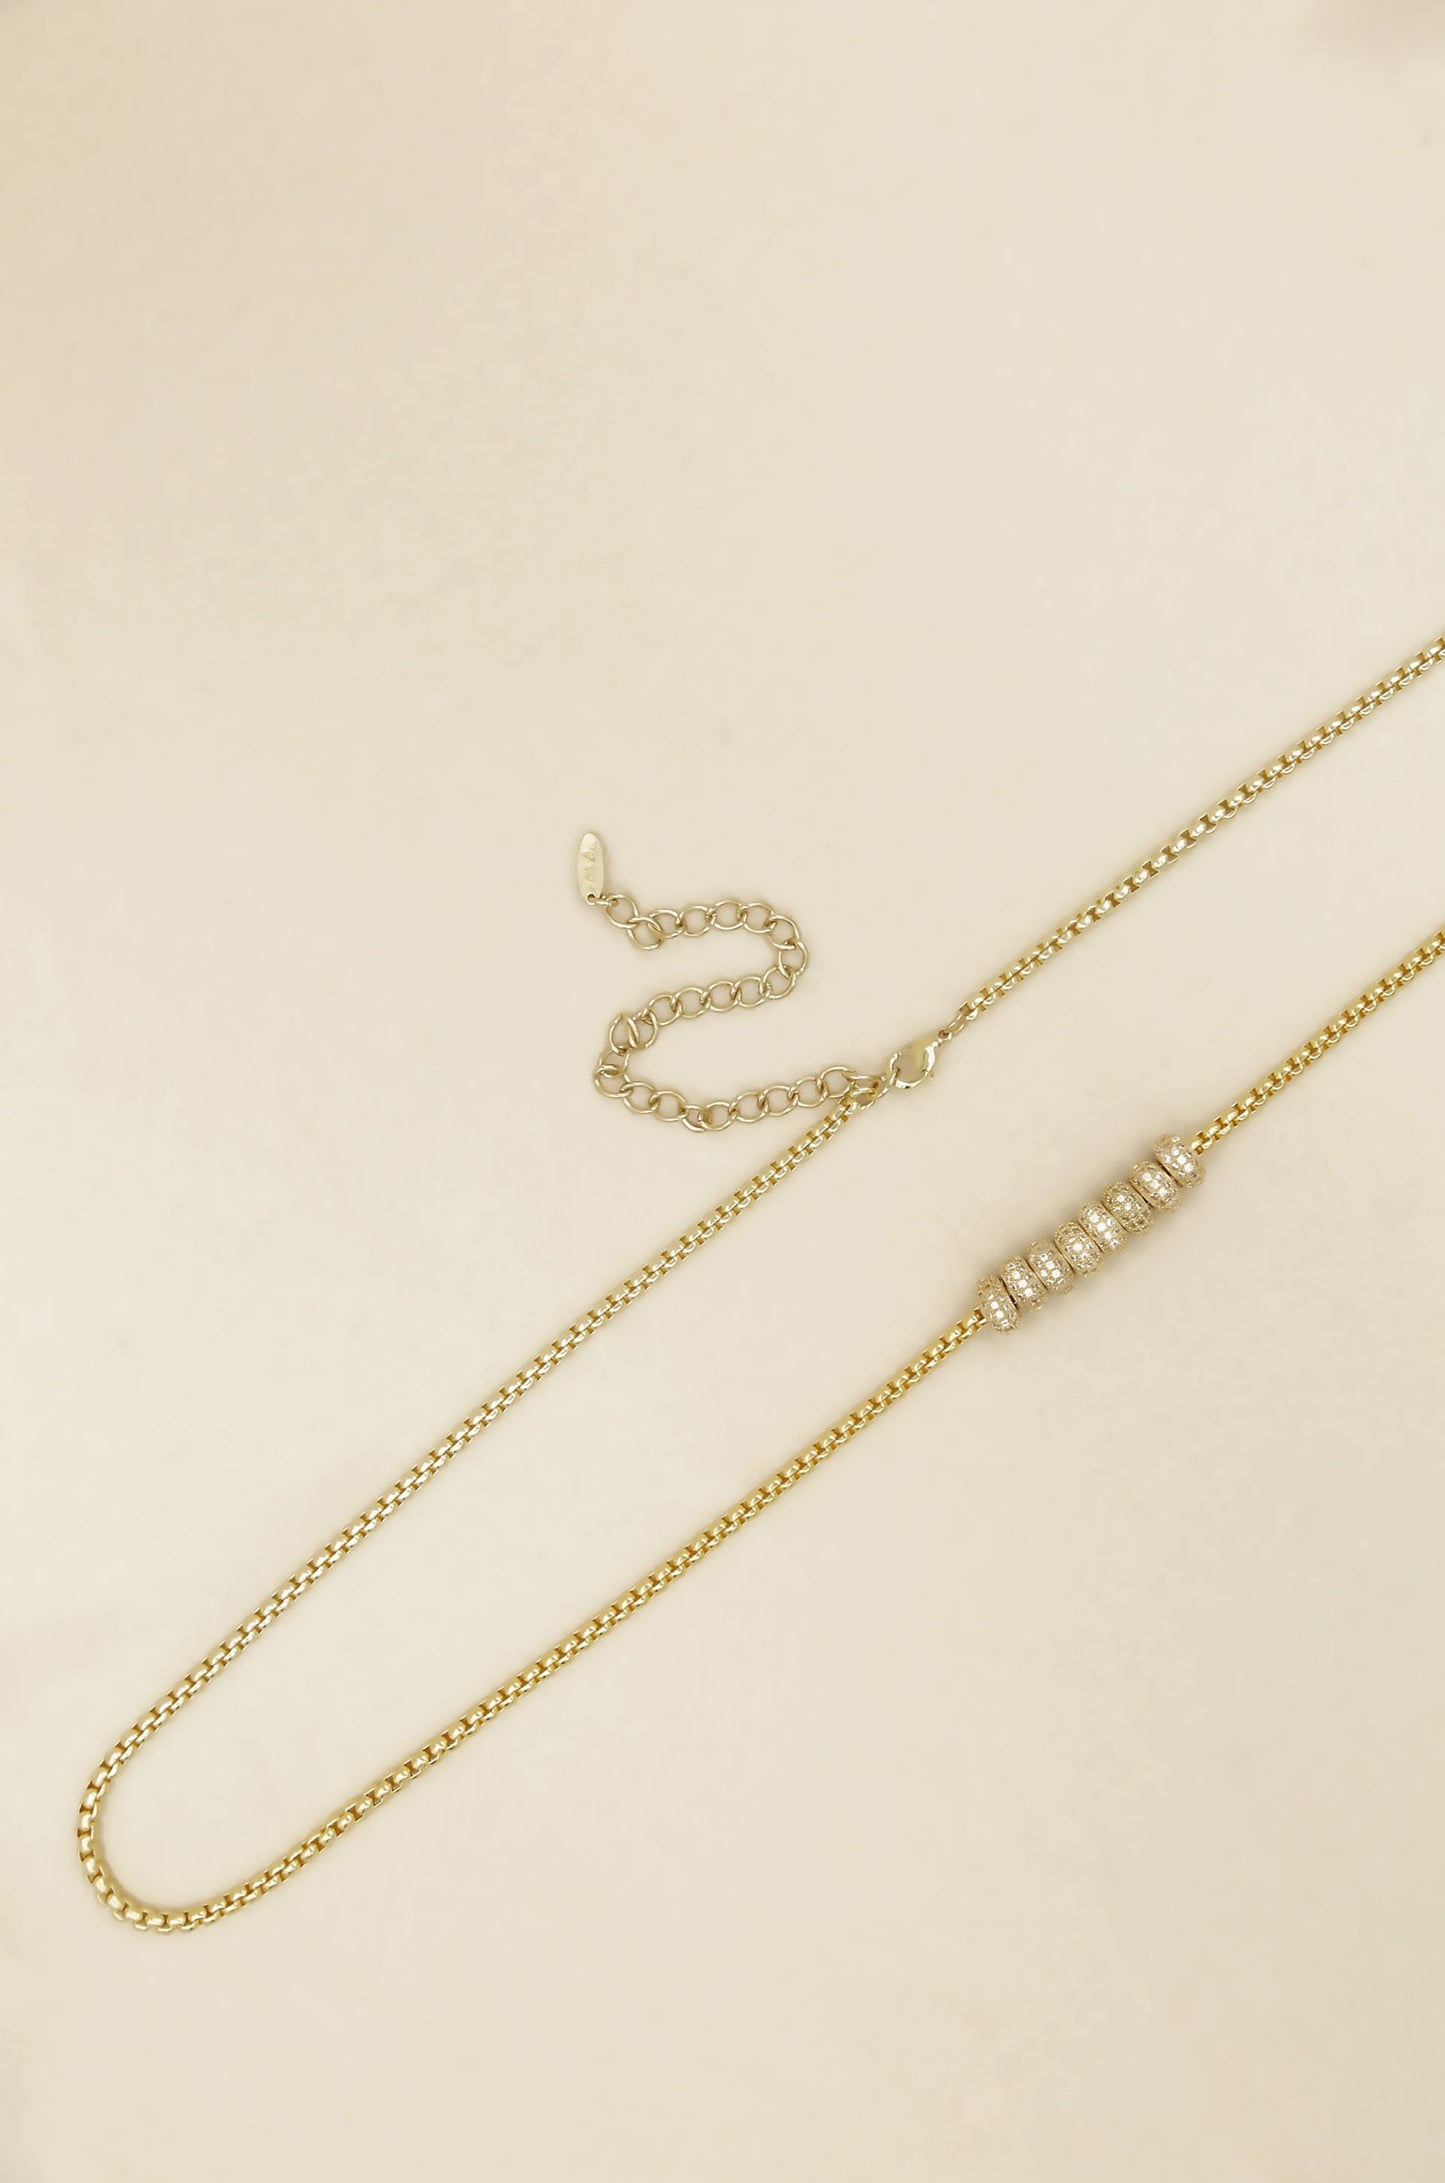 Single Strand Gold Plated Body Chain on satin